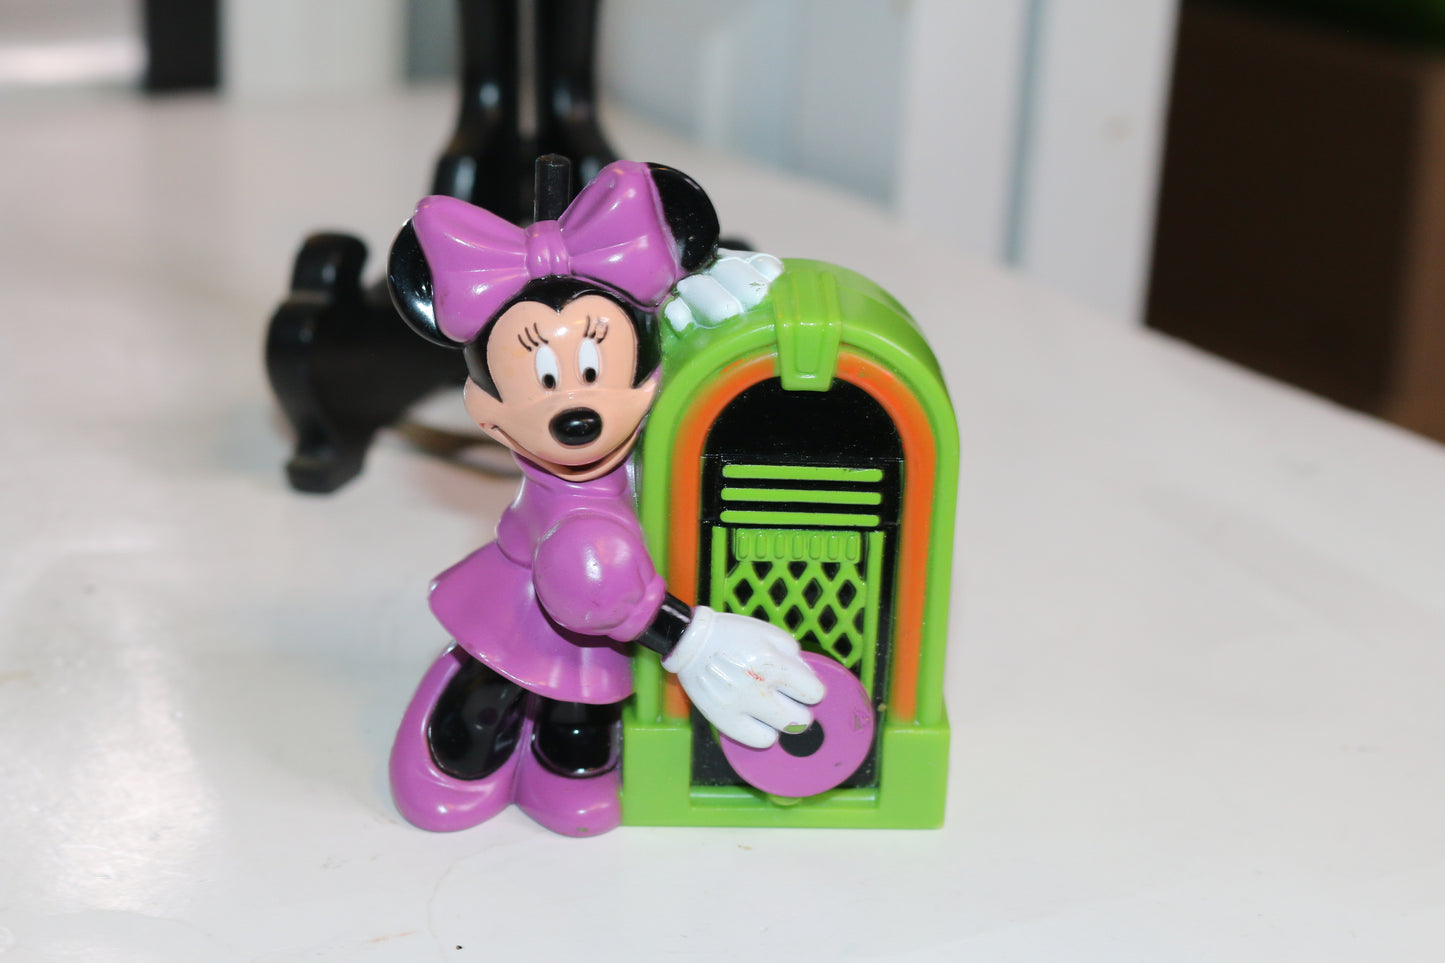 Vintage Disney's Mickey Mouse Minnie Figure Candy Dispenser Toy  90s Cake Topper